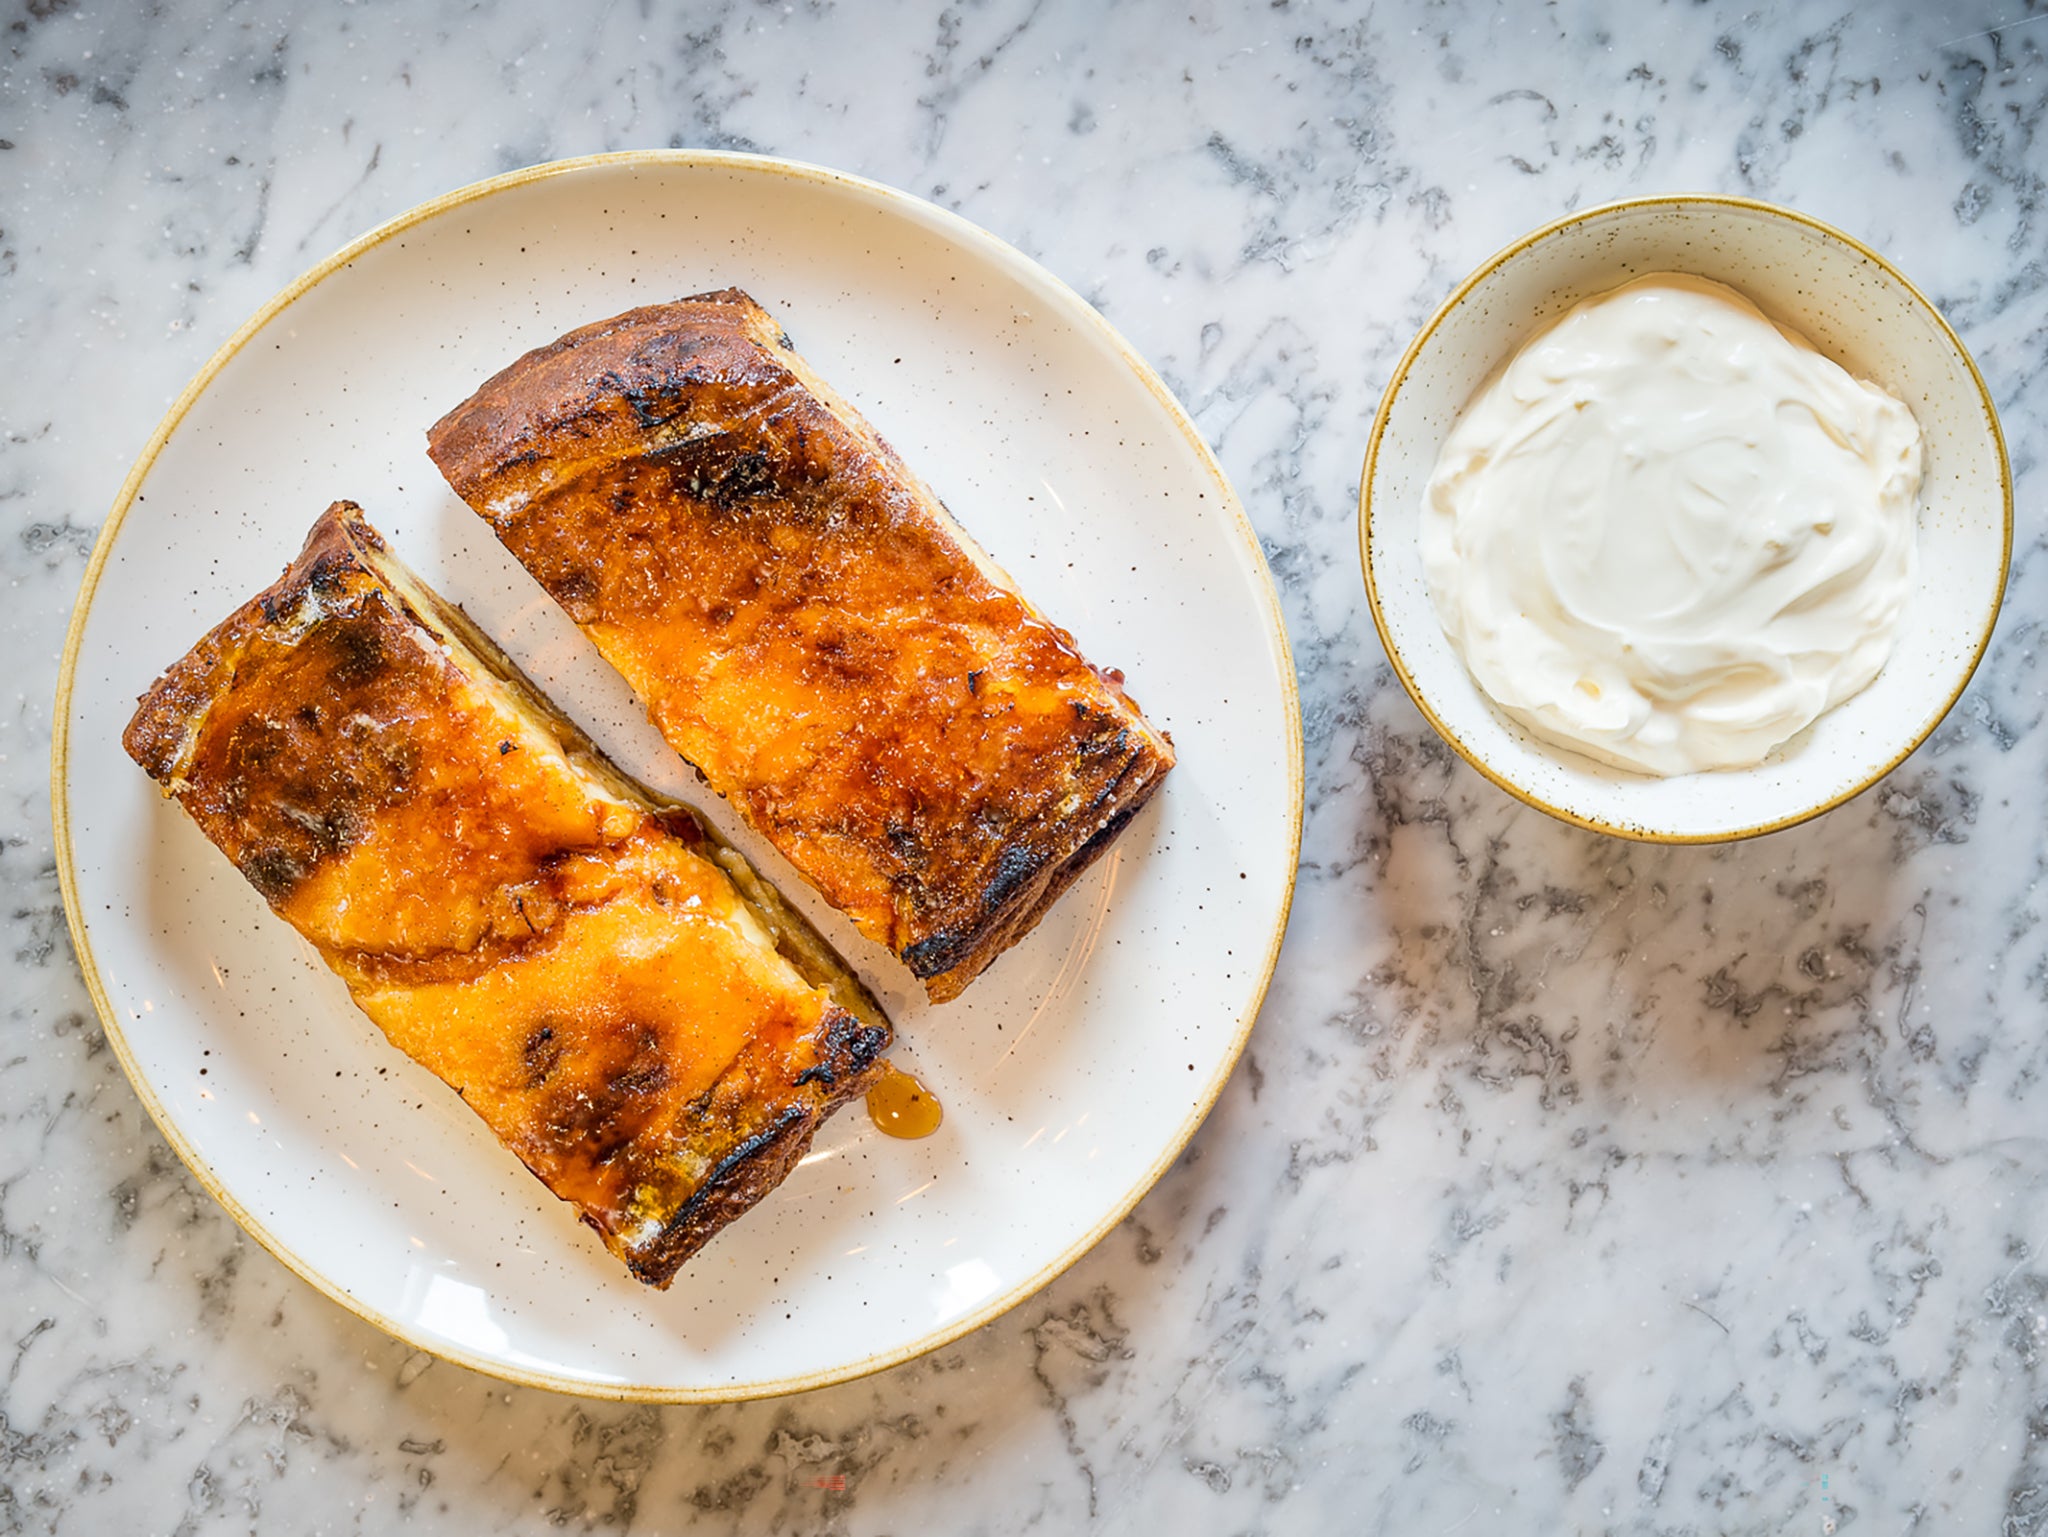 Give your bread and butter pudding an upgrade with leftover pannettone (if you have any!)